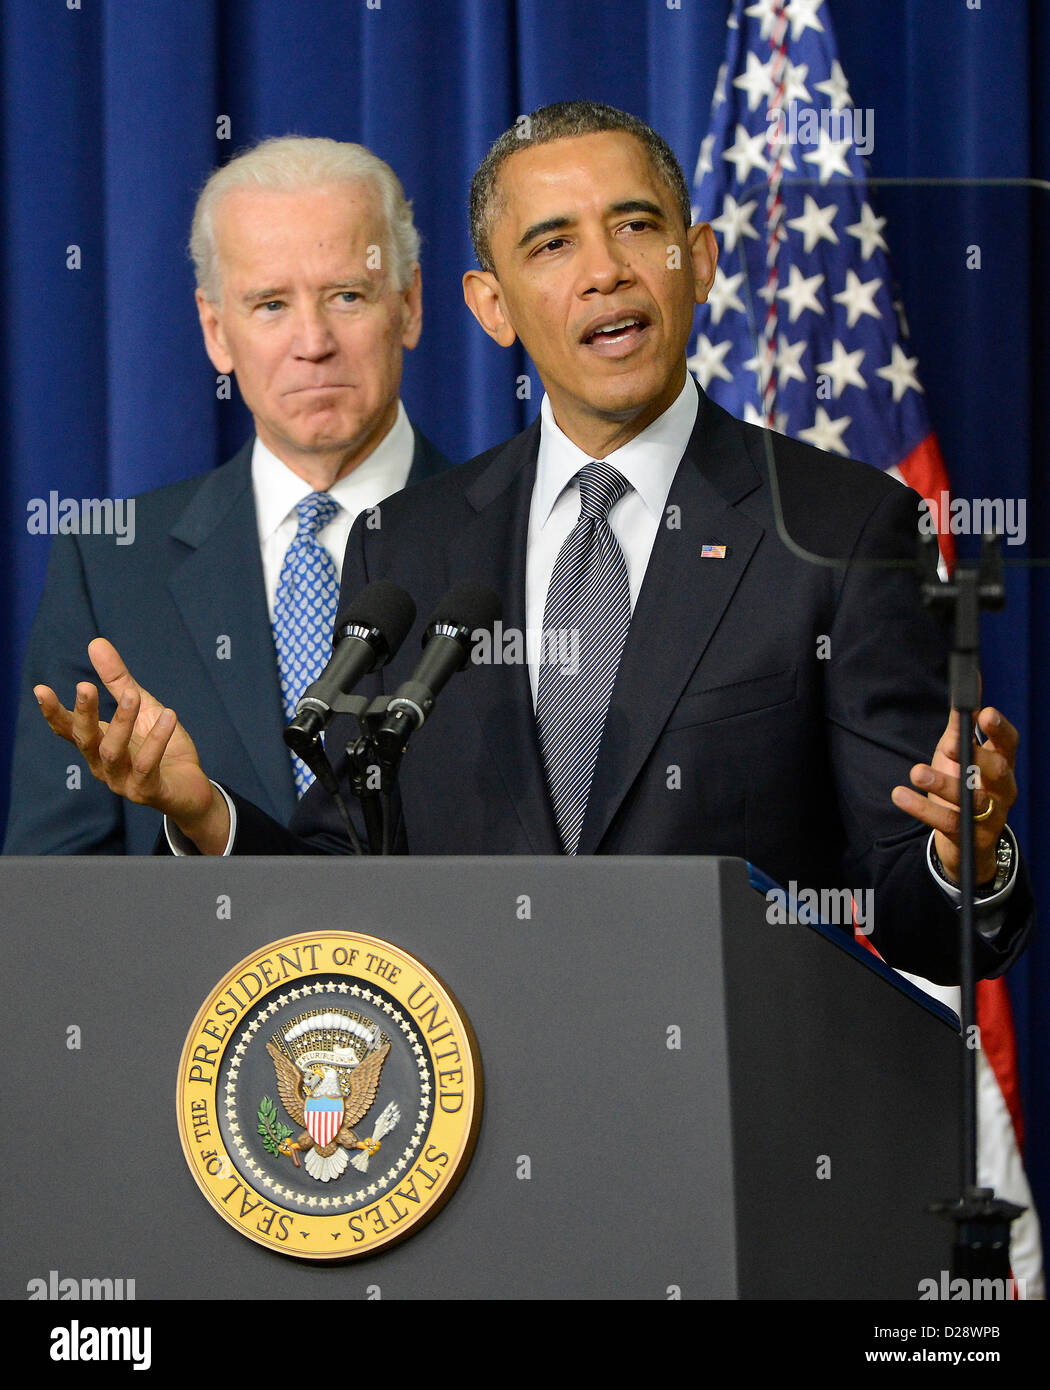 United States President Barack Obama makes remarks as Vice President Joe Biden listens at an event at the White House in Washington, D.C. to unveil a set of proposals to reduce gun violence on Wednesday, January 16, 2012..Credit: Ron Sachs / CNP Stock Photo